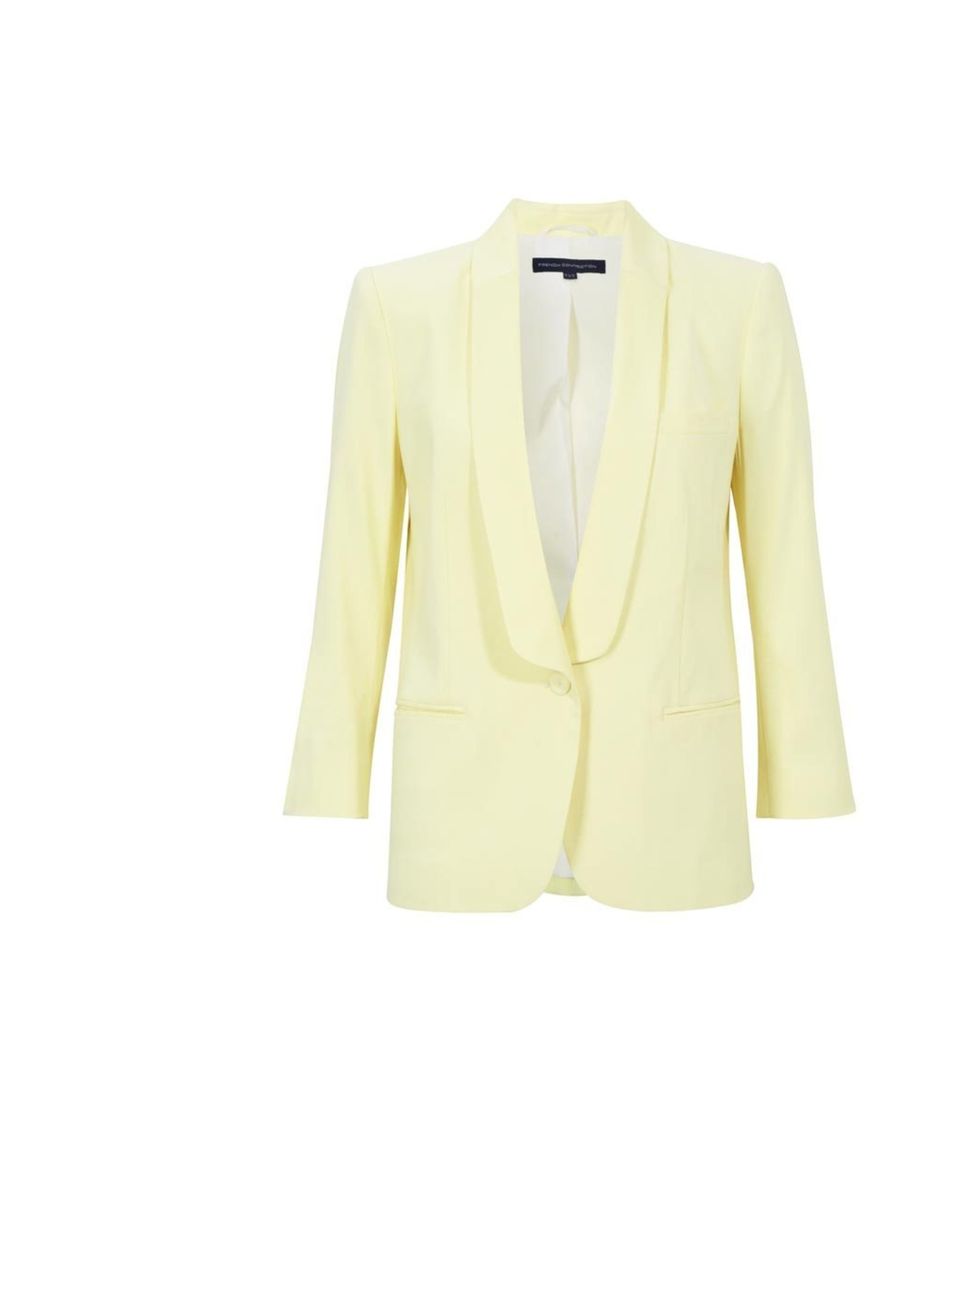 <p><a href="http://www.frenchconnection.com/">French Connection</a> blazer, £165</p>